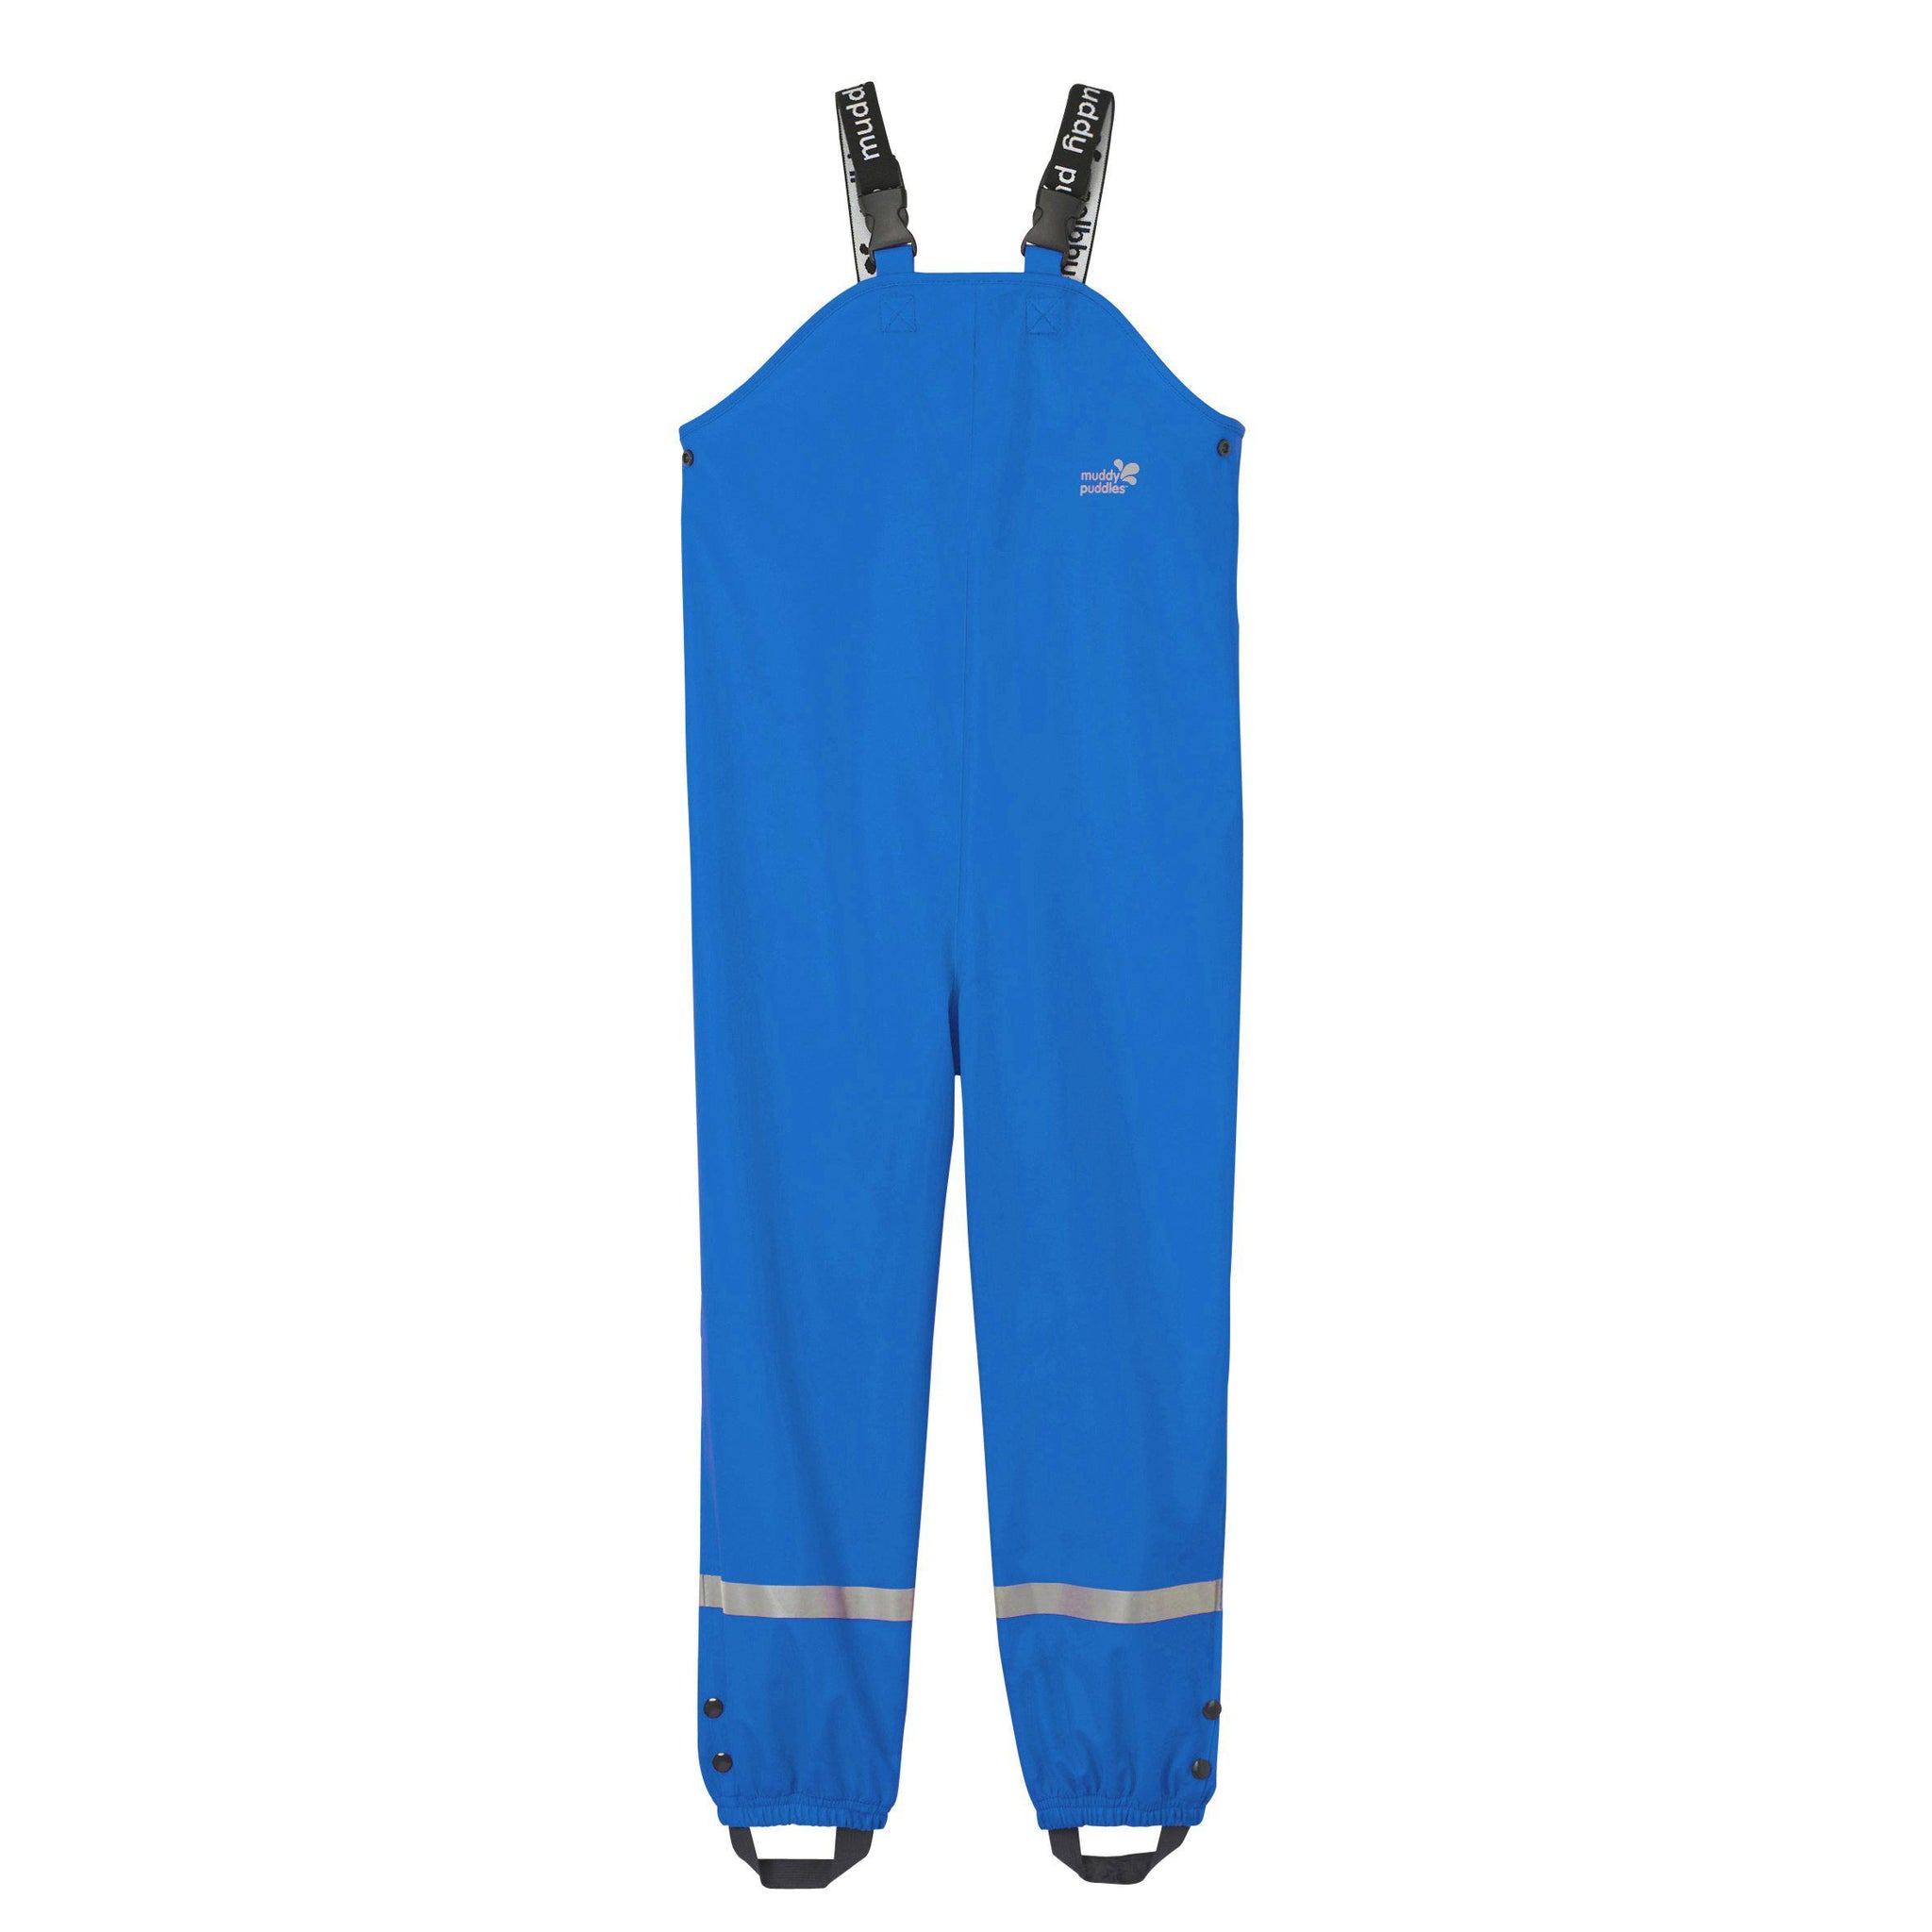 Muddy Puddles - Bright Blue Bib and Brace Trousers (Unlined)